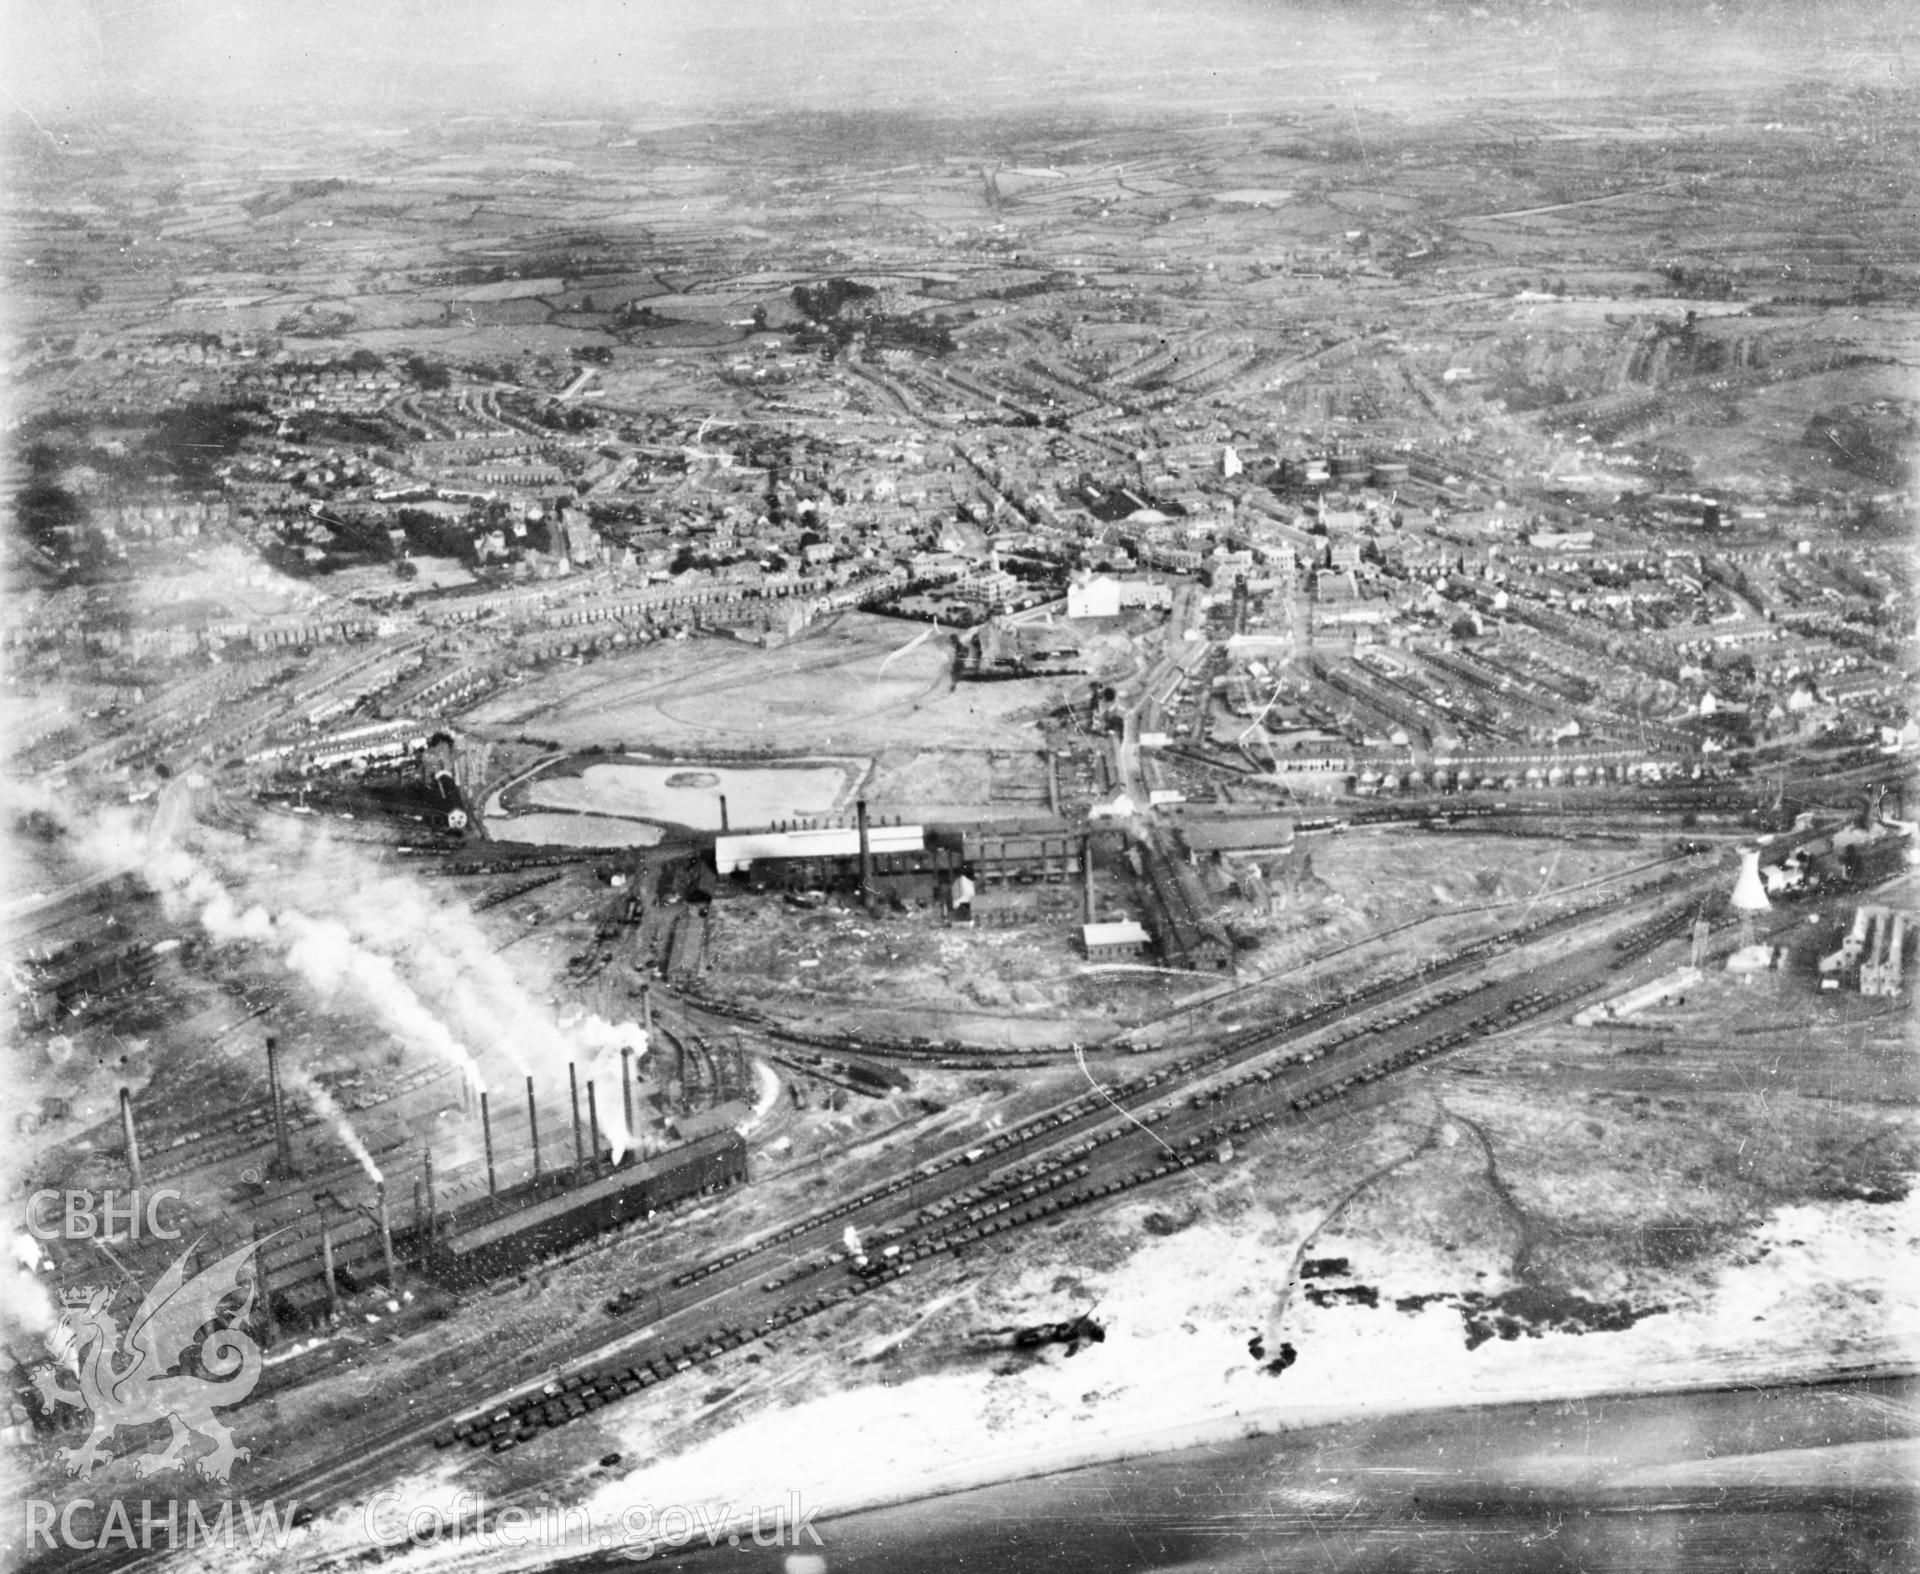 General view of Llanelli. Oblique aerial photograph, 5?x4? BW glass plate.